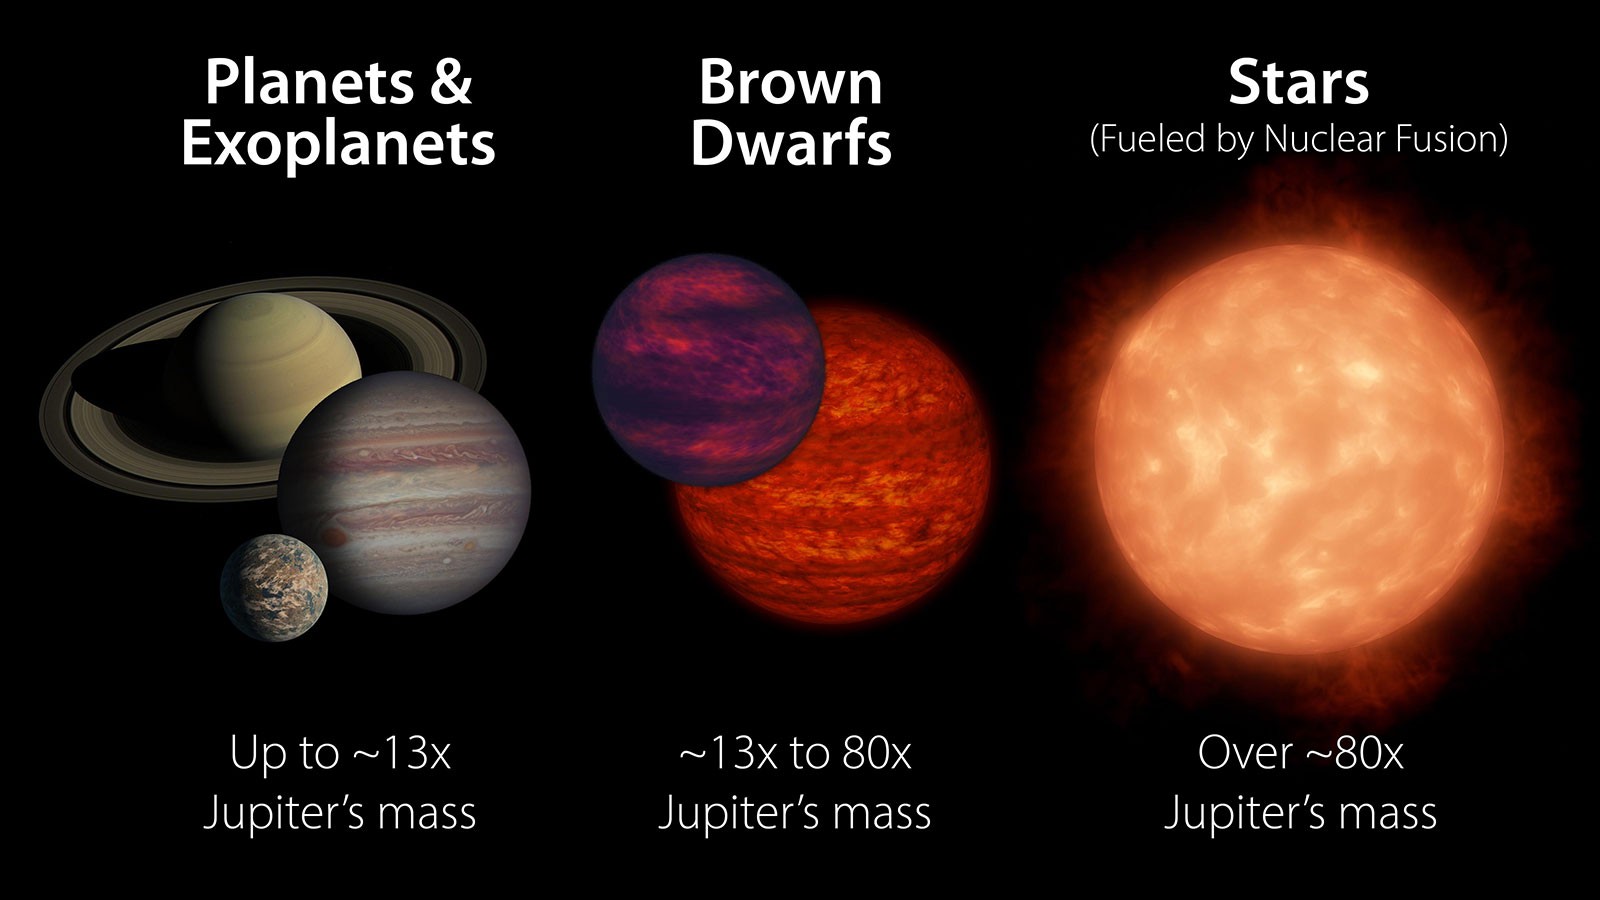 Discovery:three brown dwarfs with extreme rotation speeds 